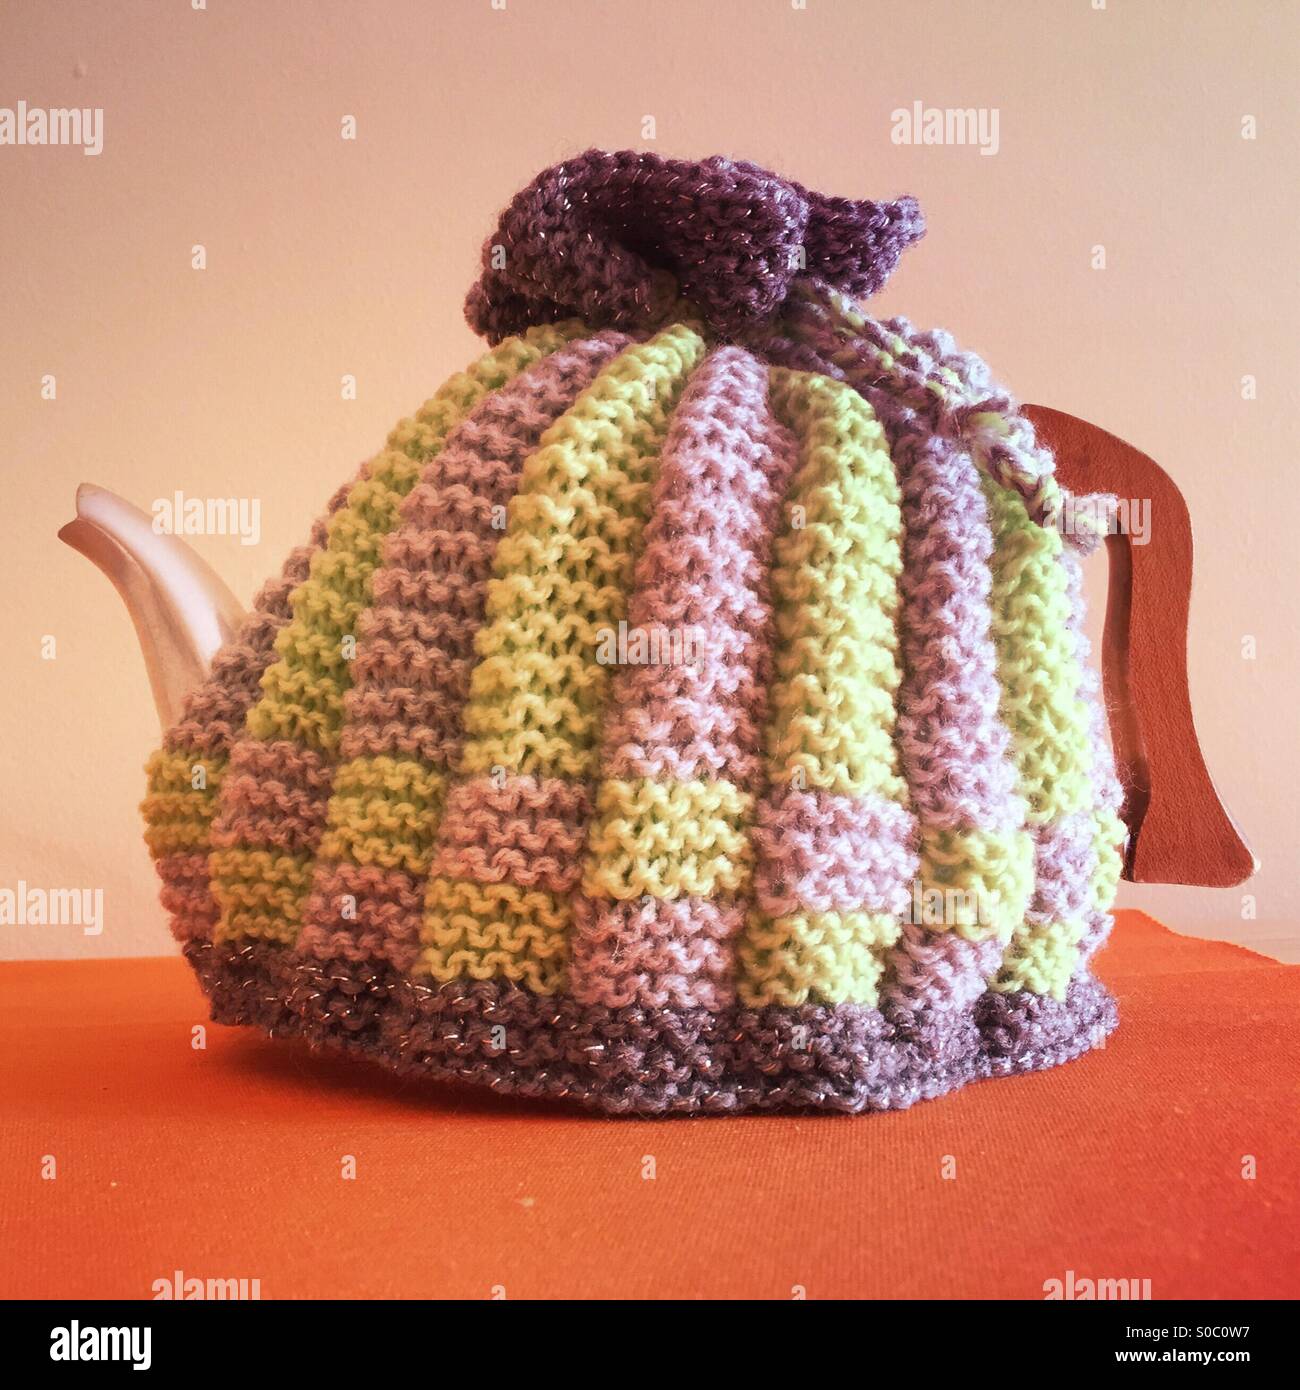 Handmade knitted tea cosy on a stainless steel teapot Stock Photo